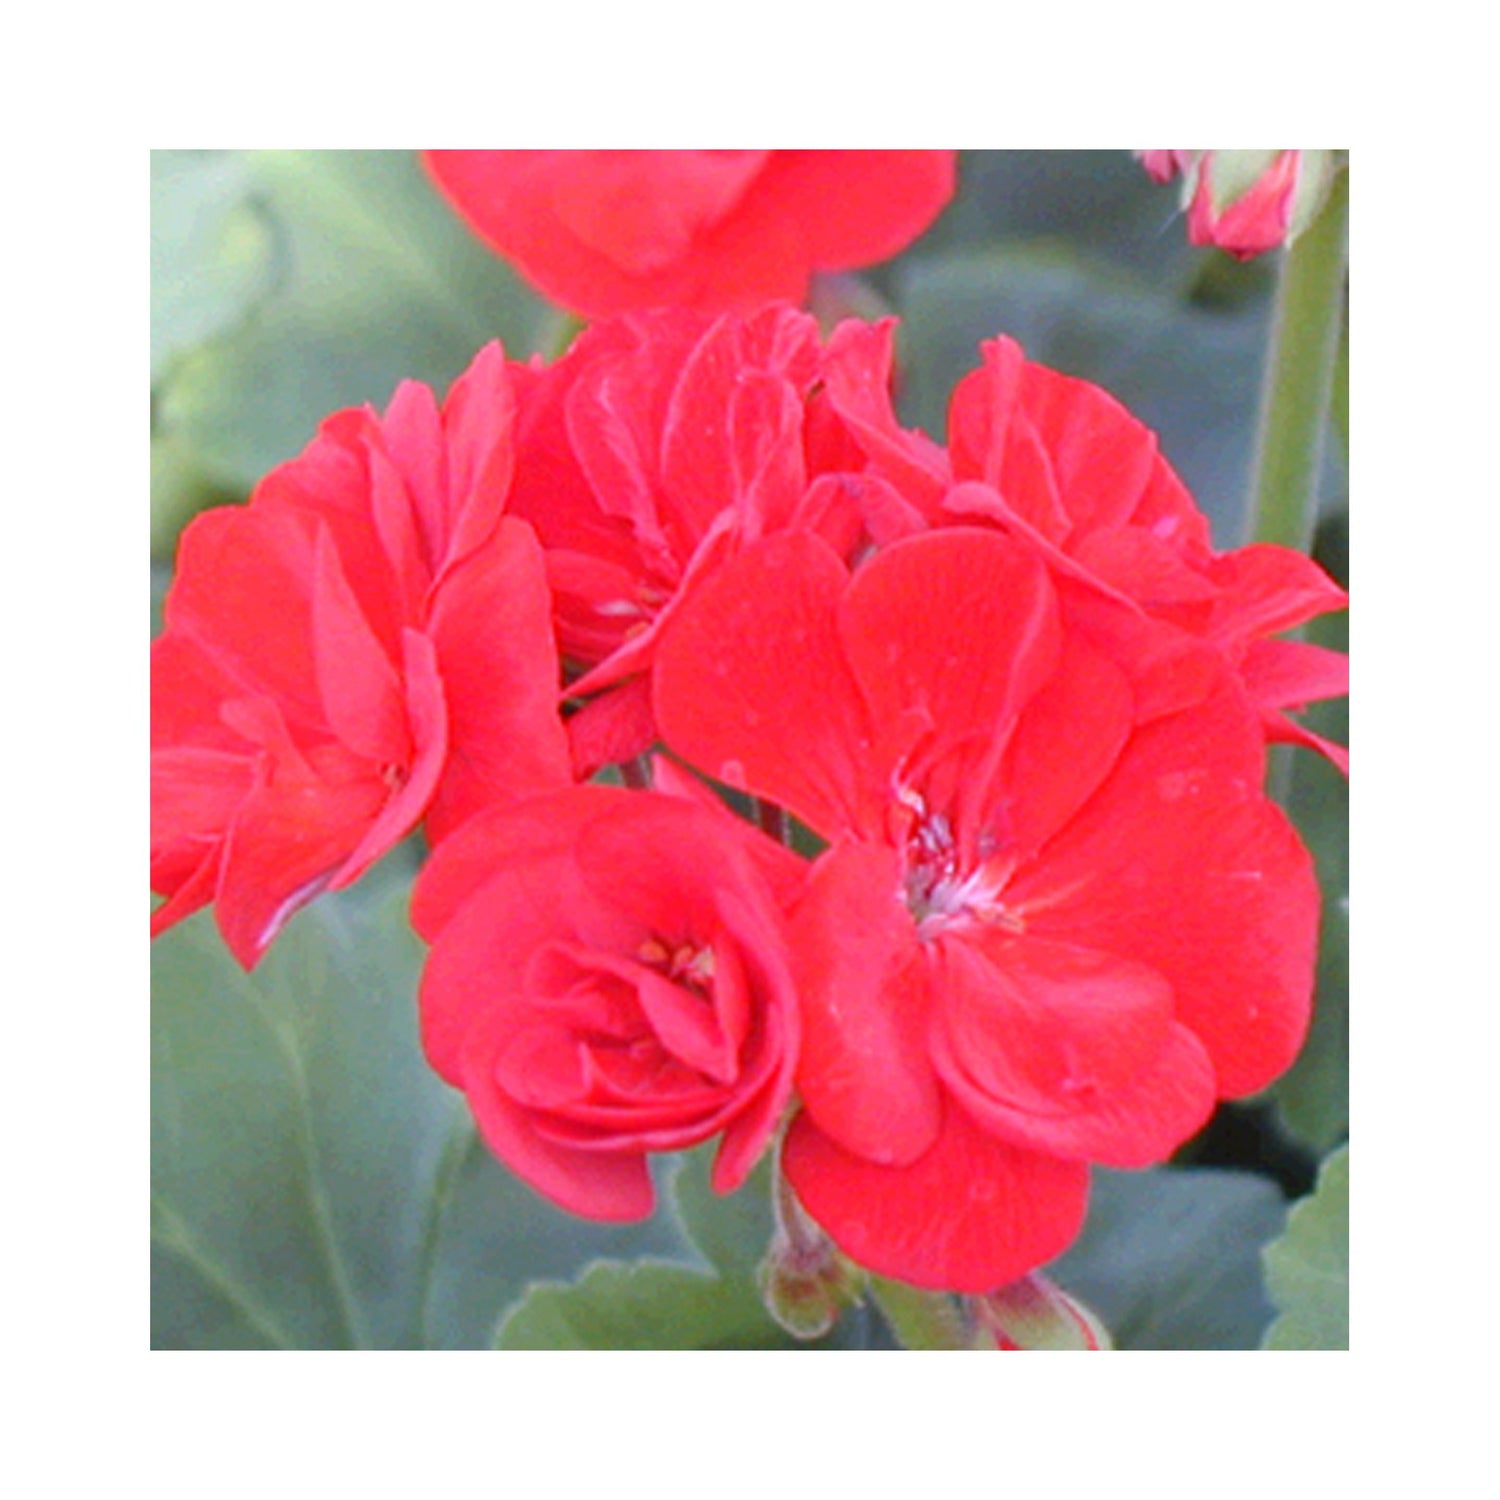 Upright (Zonal) Geranium plug plants 10 mixed plants. Amazing value, well rooted.